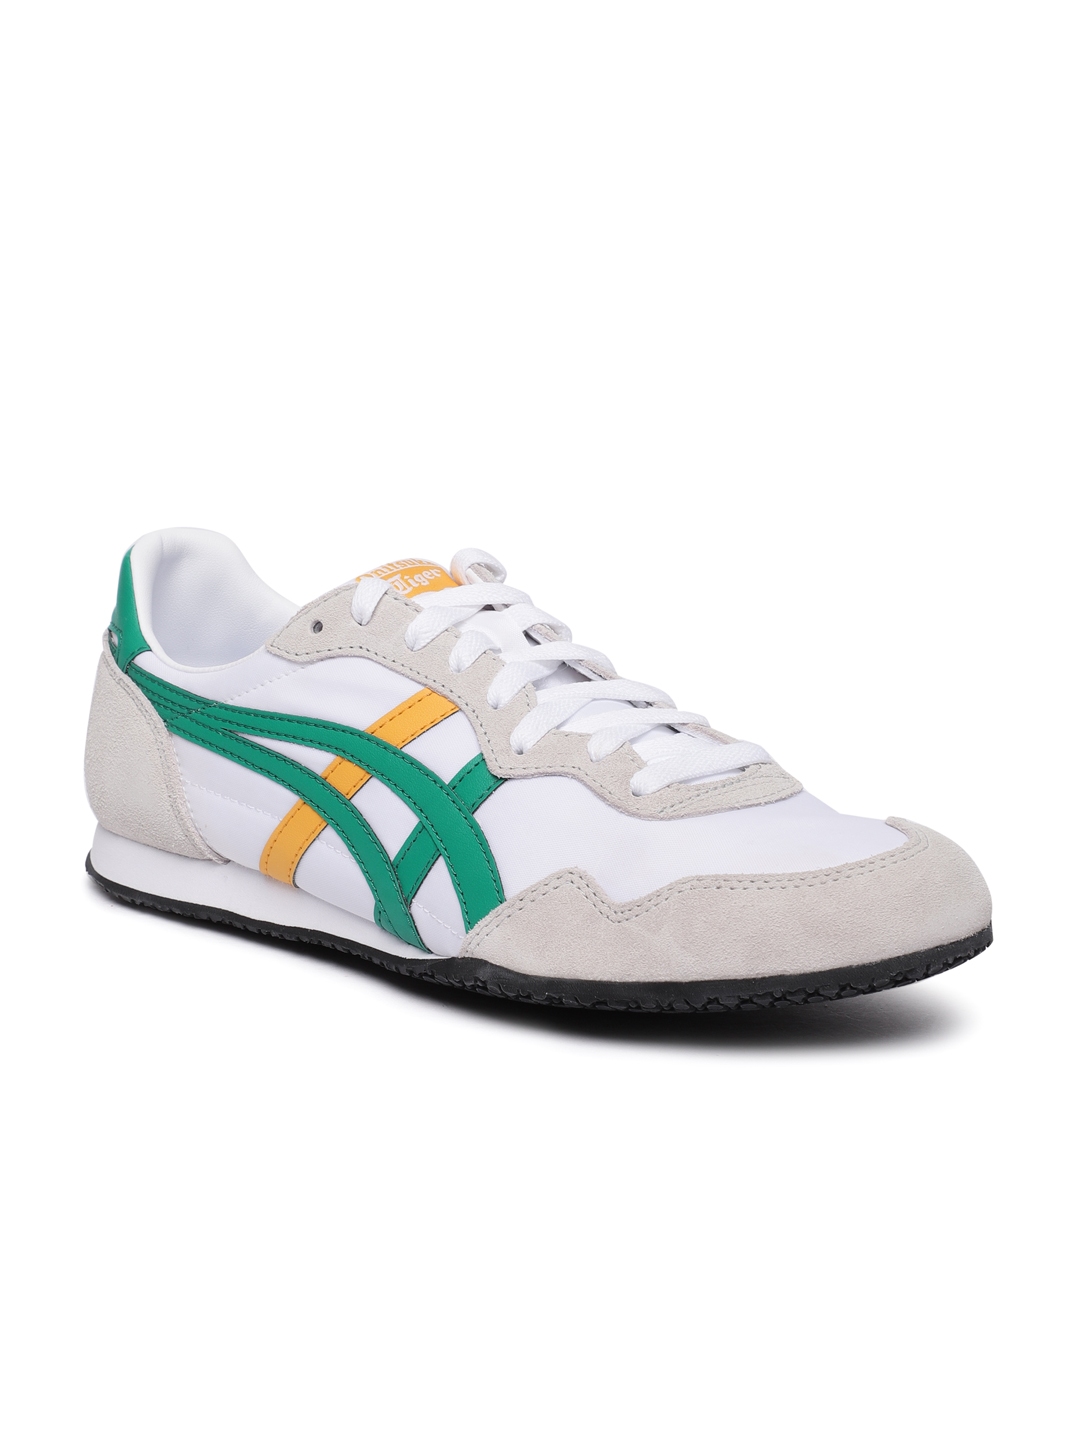 Buy Onitsuka Tiger Serrano - Casual Shoes for Unisex 10393273 | Myntra